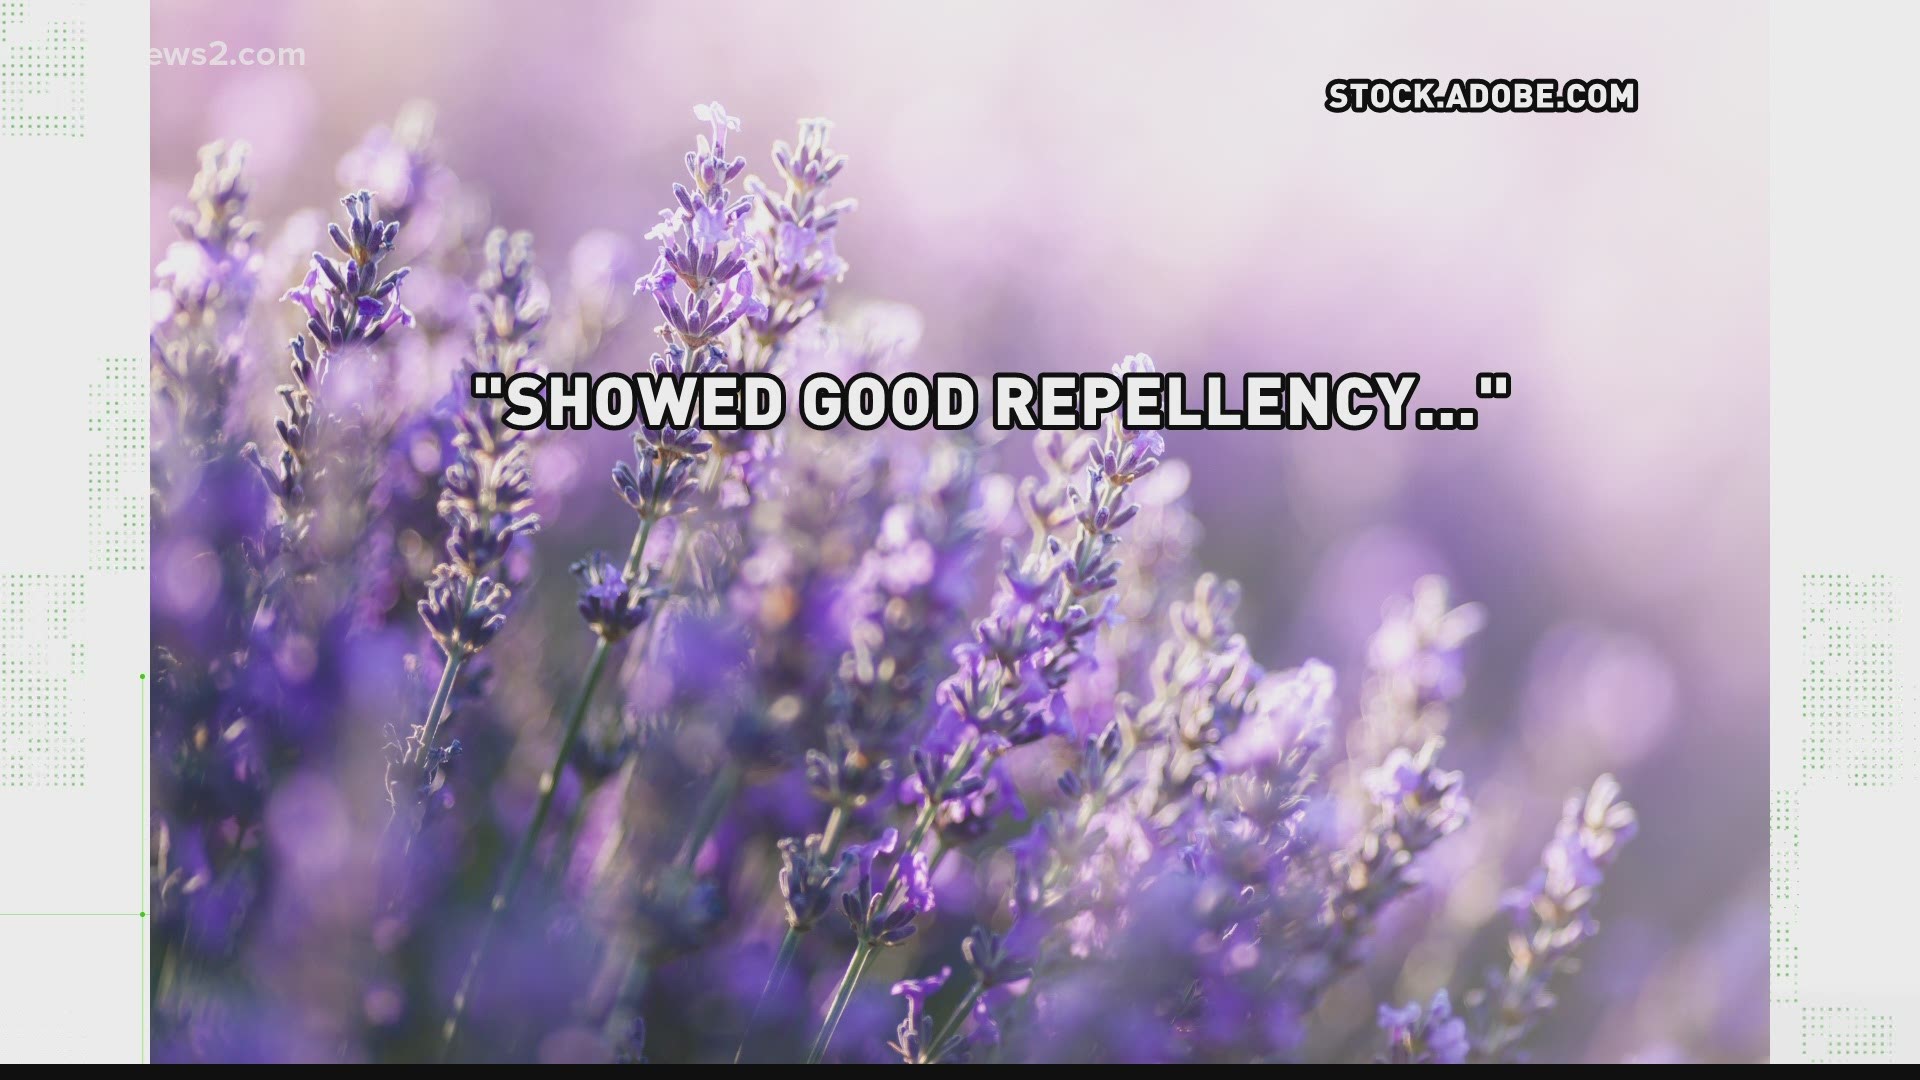 Need to 'scratch the itch' but don't want to spray greasy chemicals on your skin? Experts VERIFY lavender is an effective mosquito repellent.